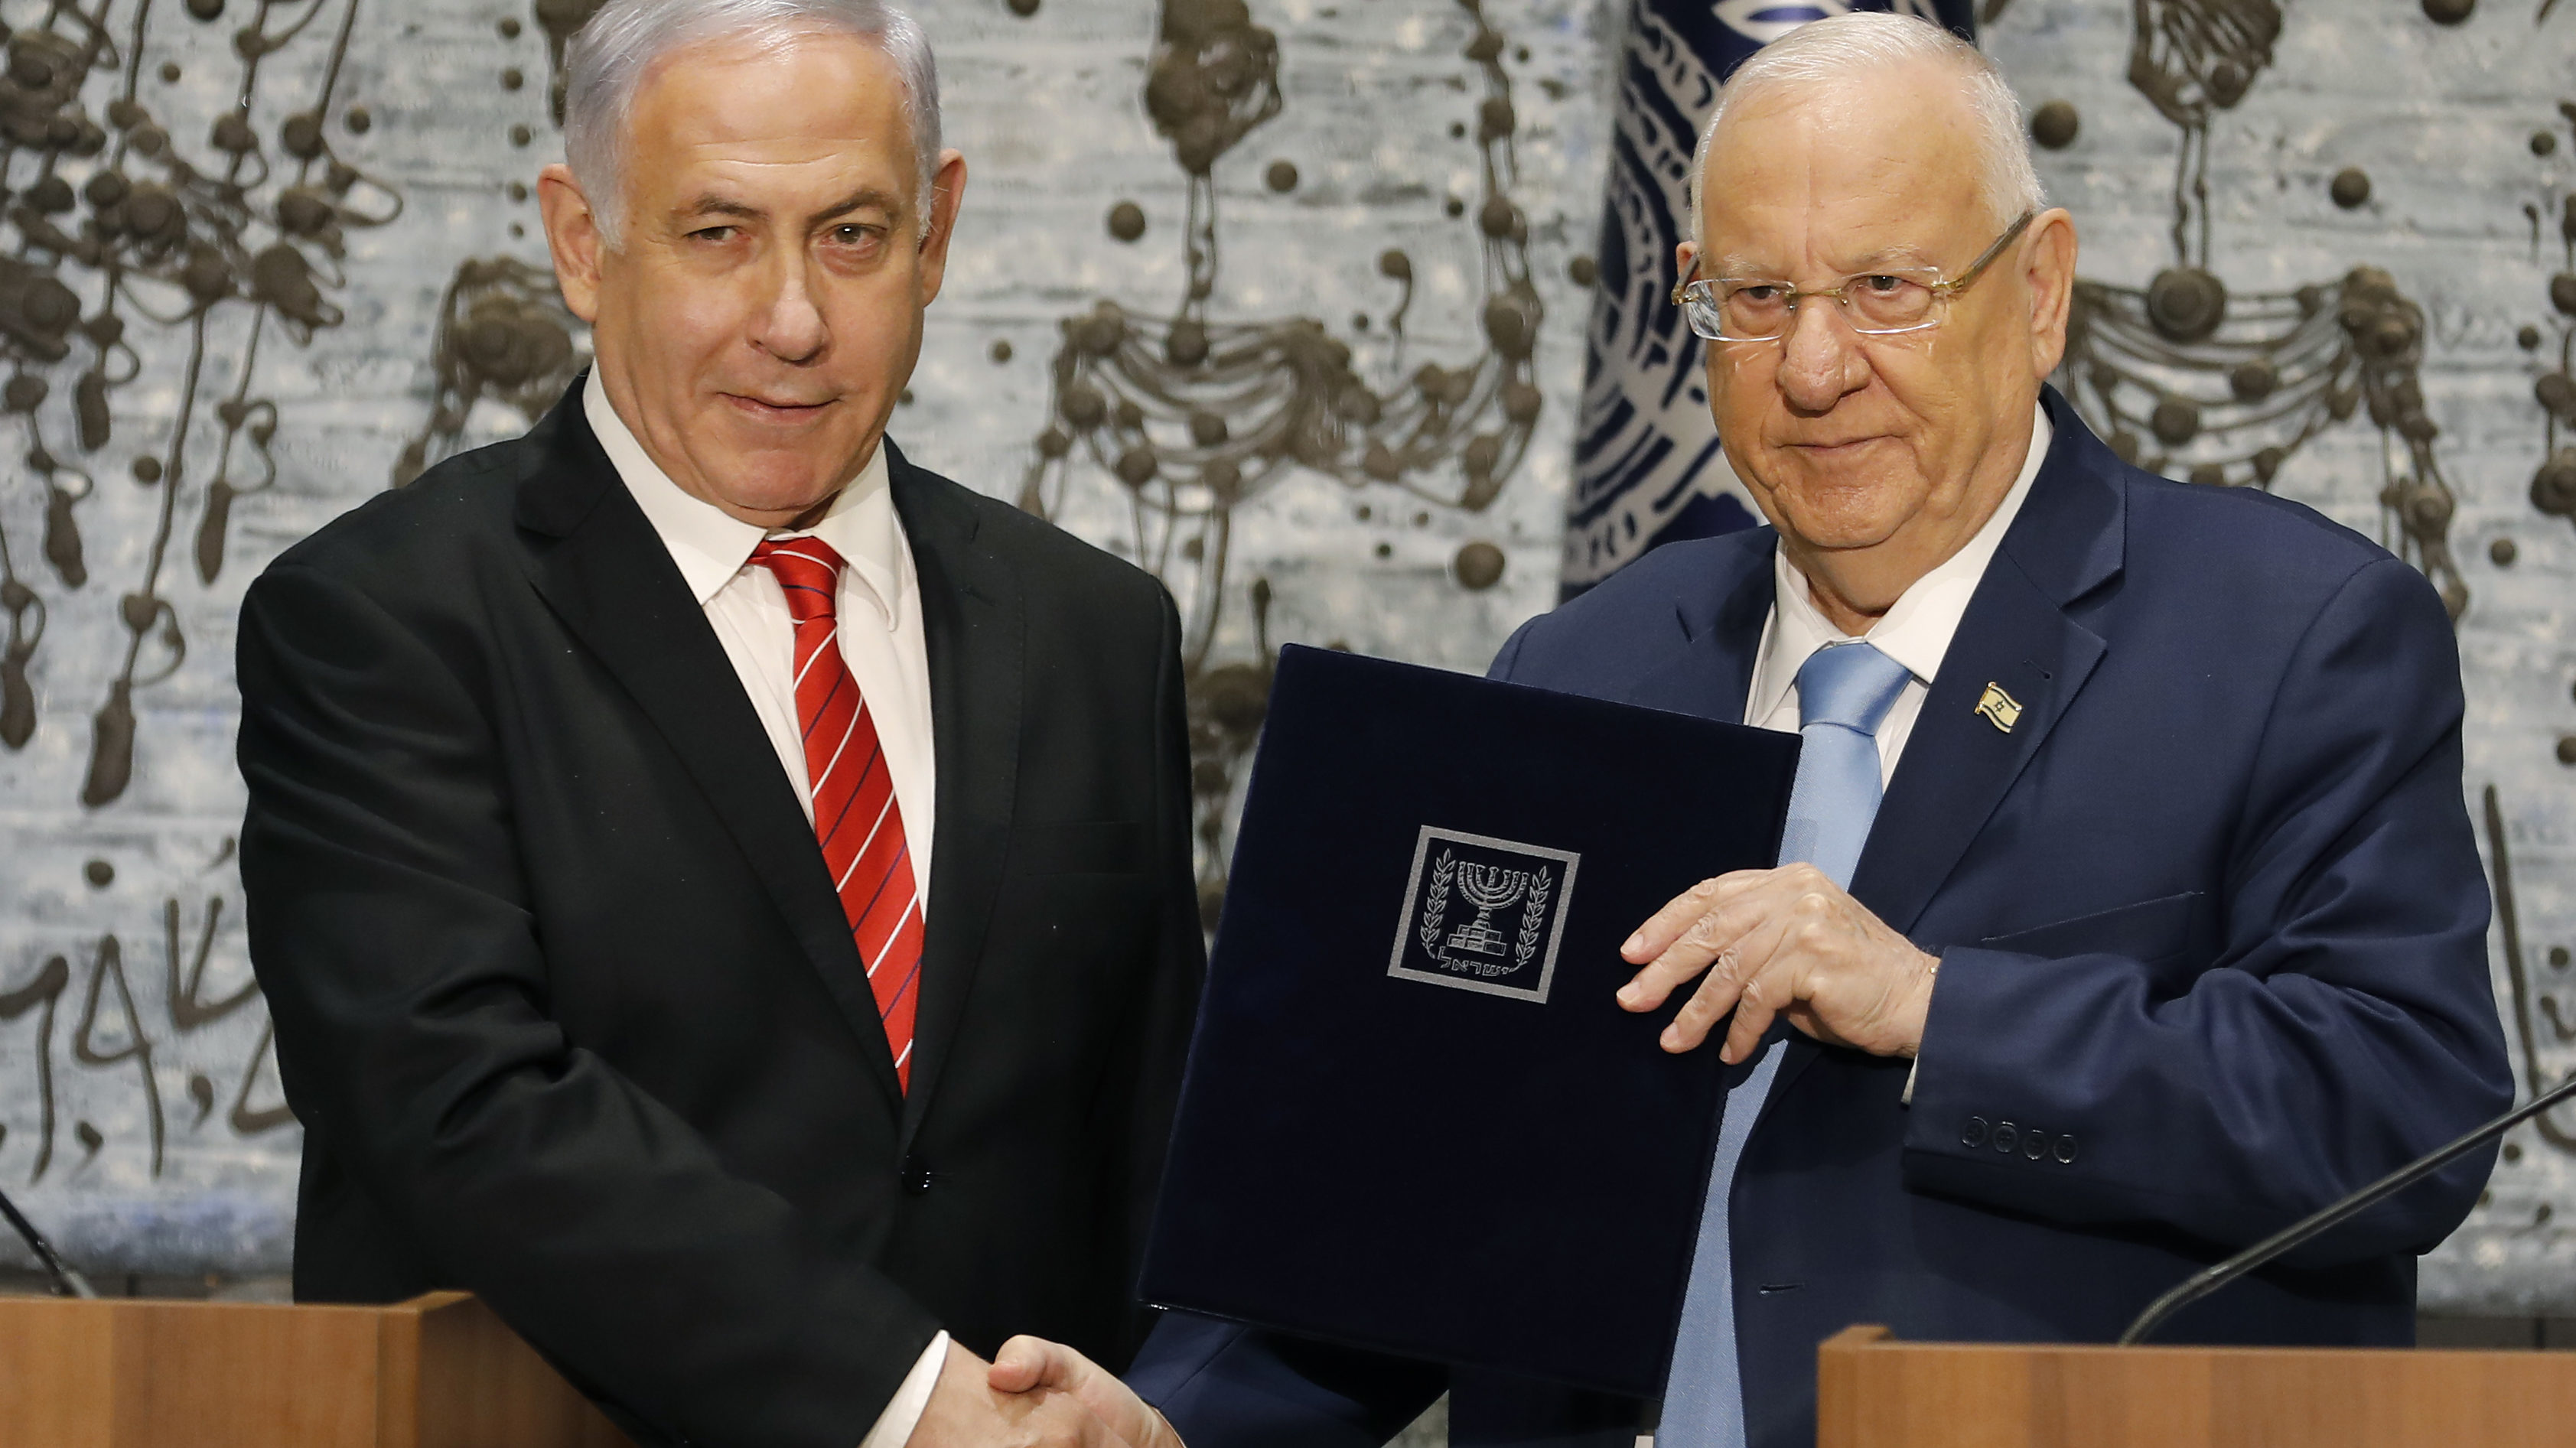 An Unhappy Israeli President Gives Netanyahu First Chance to Form Government